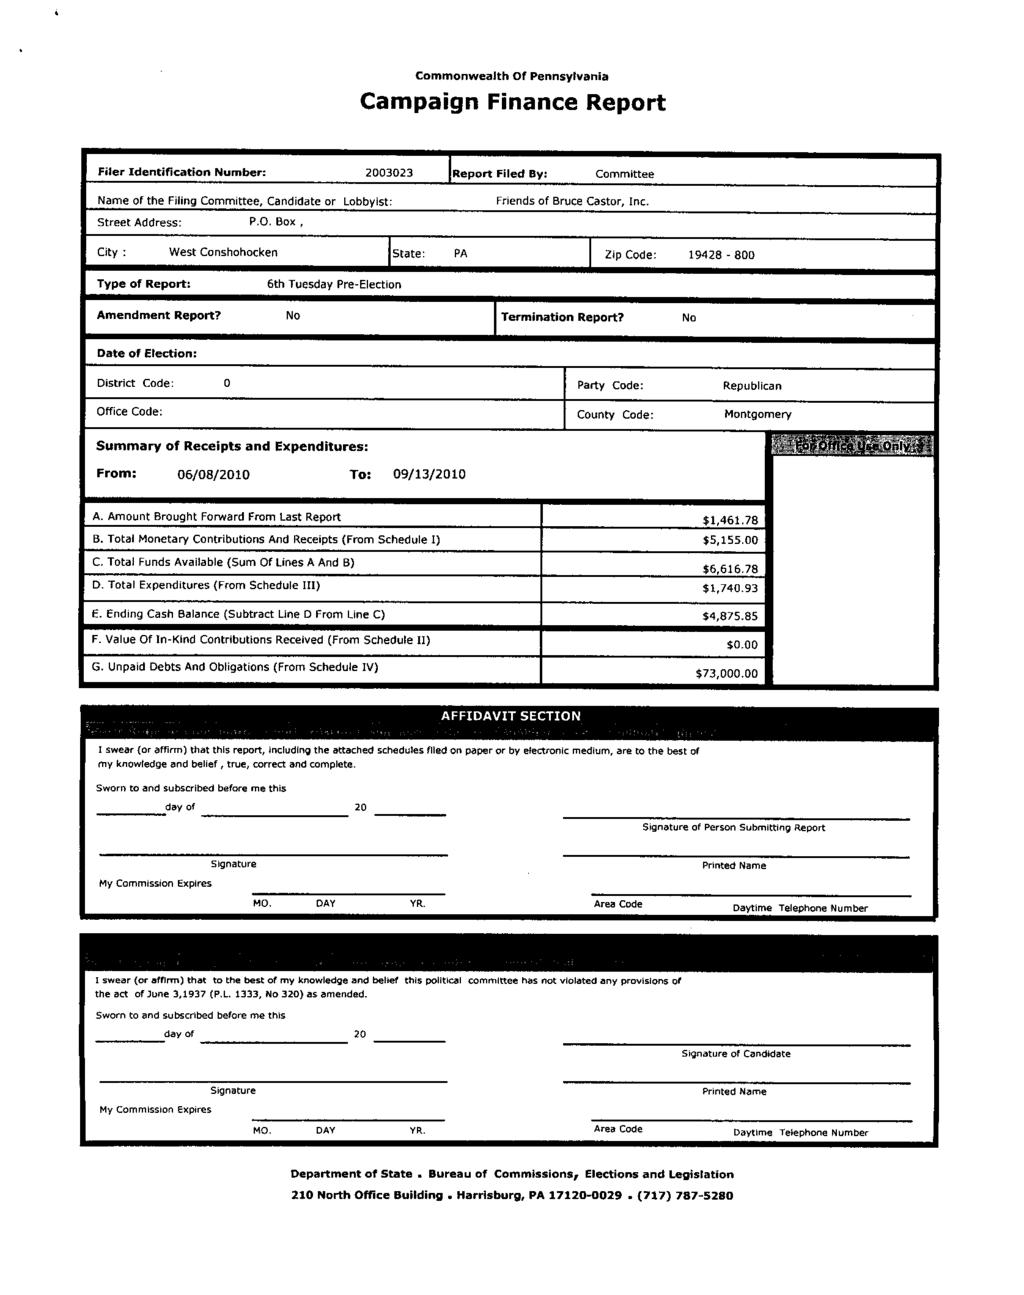 Filer Identification Number: 2003023 Report Filed By: Committee Name of the Filing Committee, Candidate or Lobbyist: Street Address: P.O. Box, Friends of Bruce Castor, Inc.